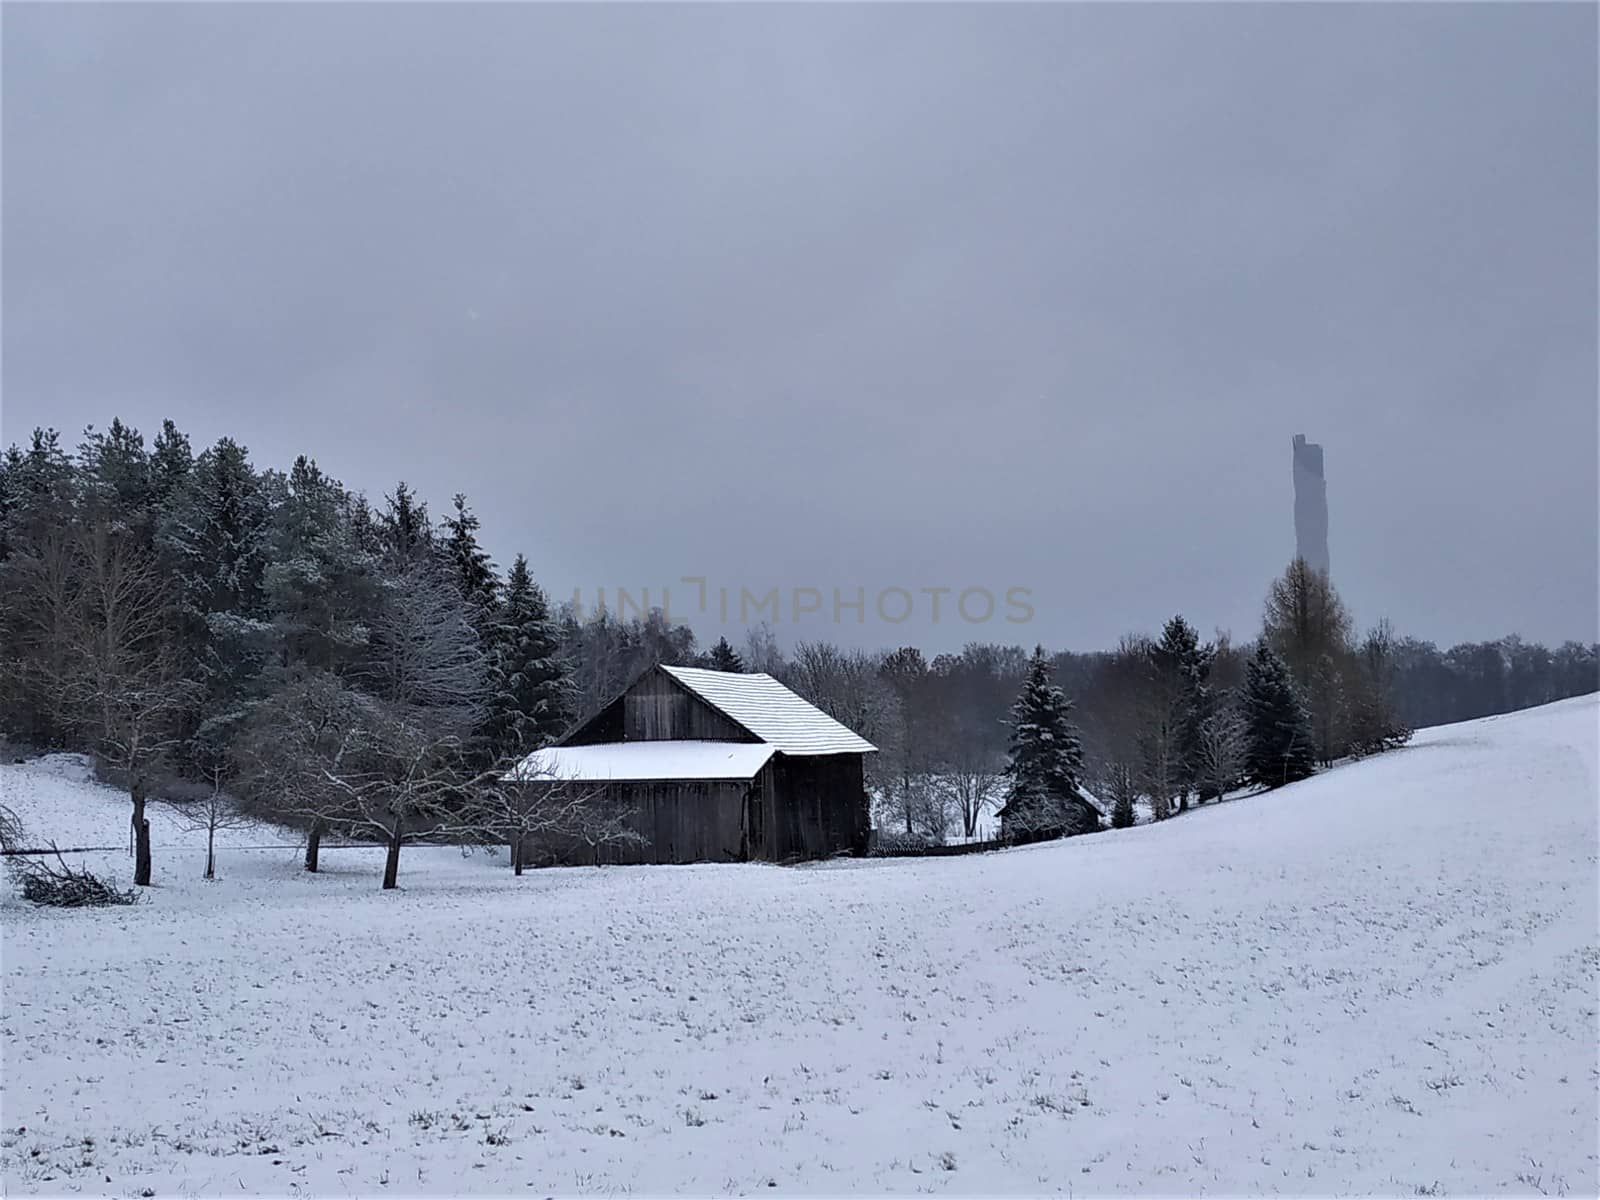 Winter landscape in Rottweil, Germany with wooden hut and test tower